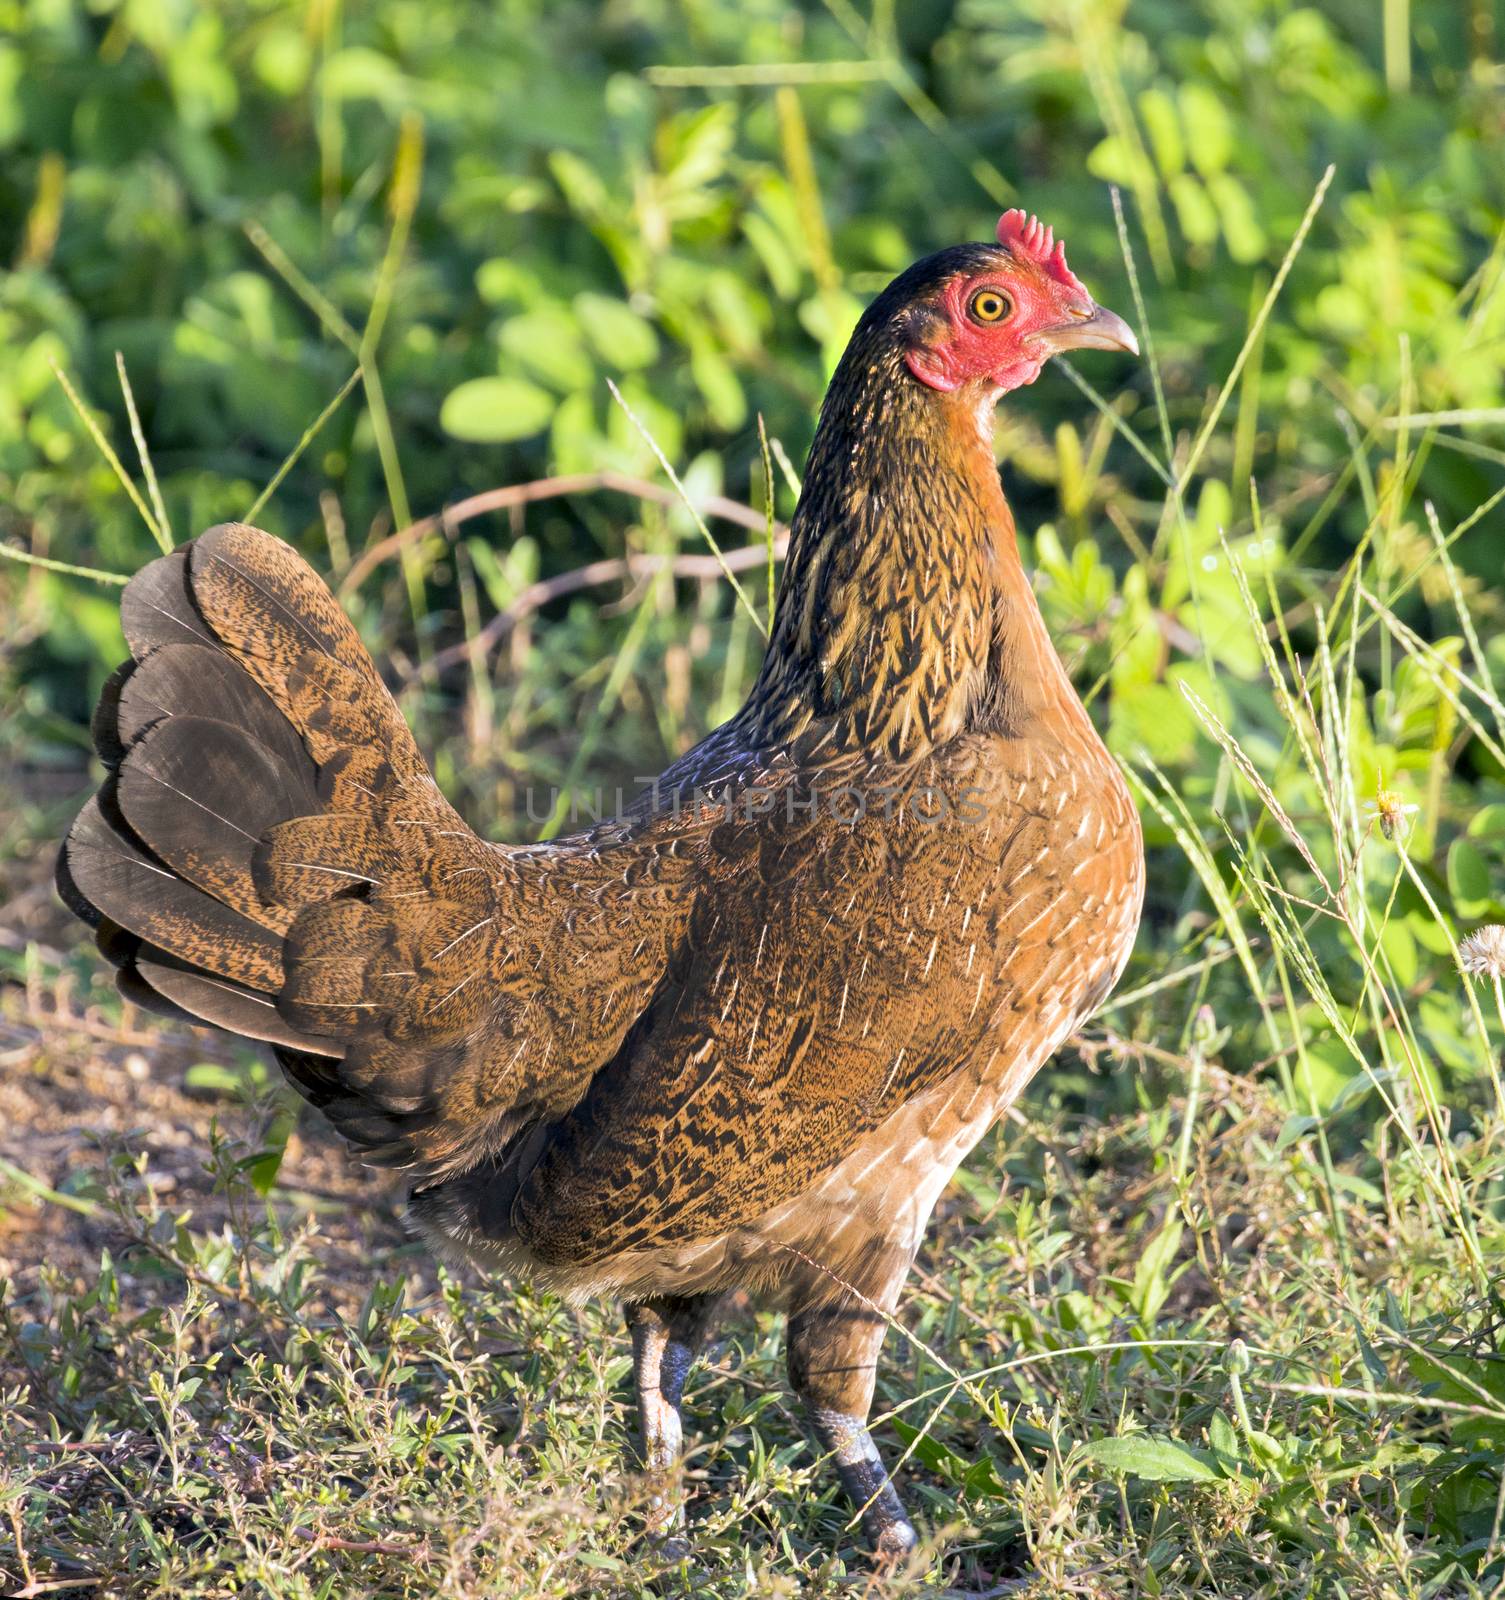 Image of brown hen on nature background.